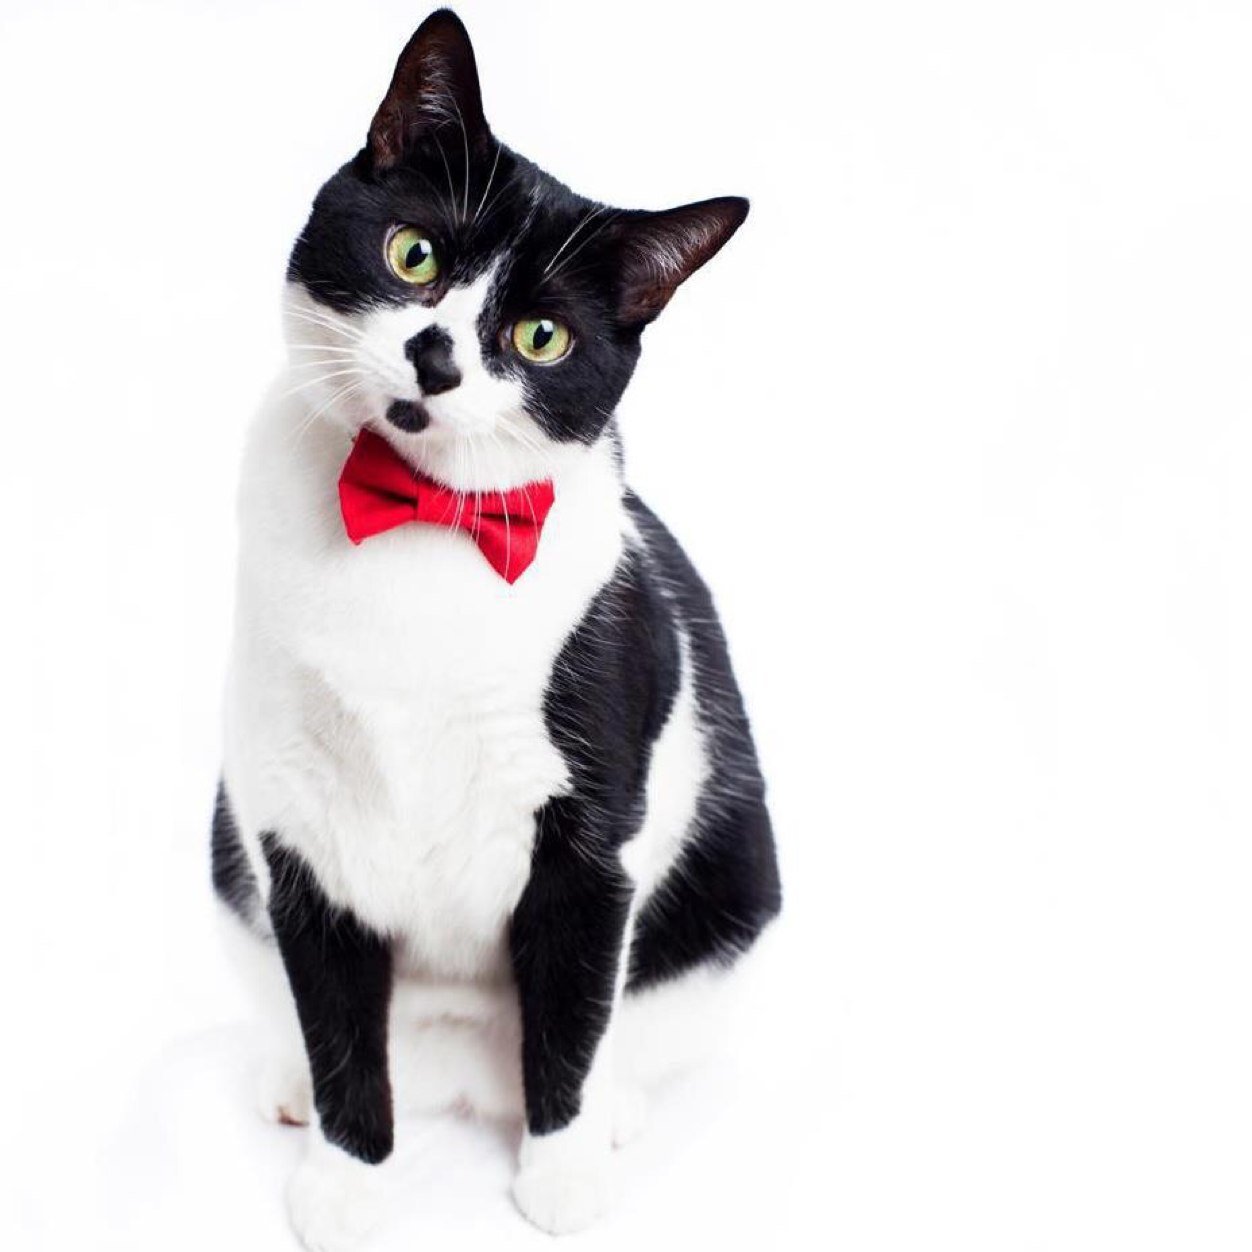 A whimsical line of cat accessories created with a vision that cats deserve to share their sense of style. All collars & accessories are handcrafted in Portland